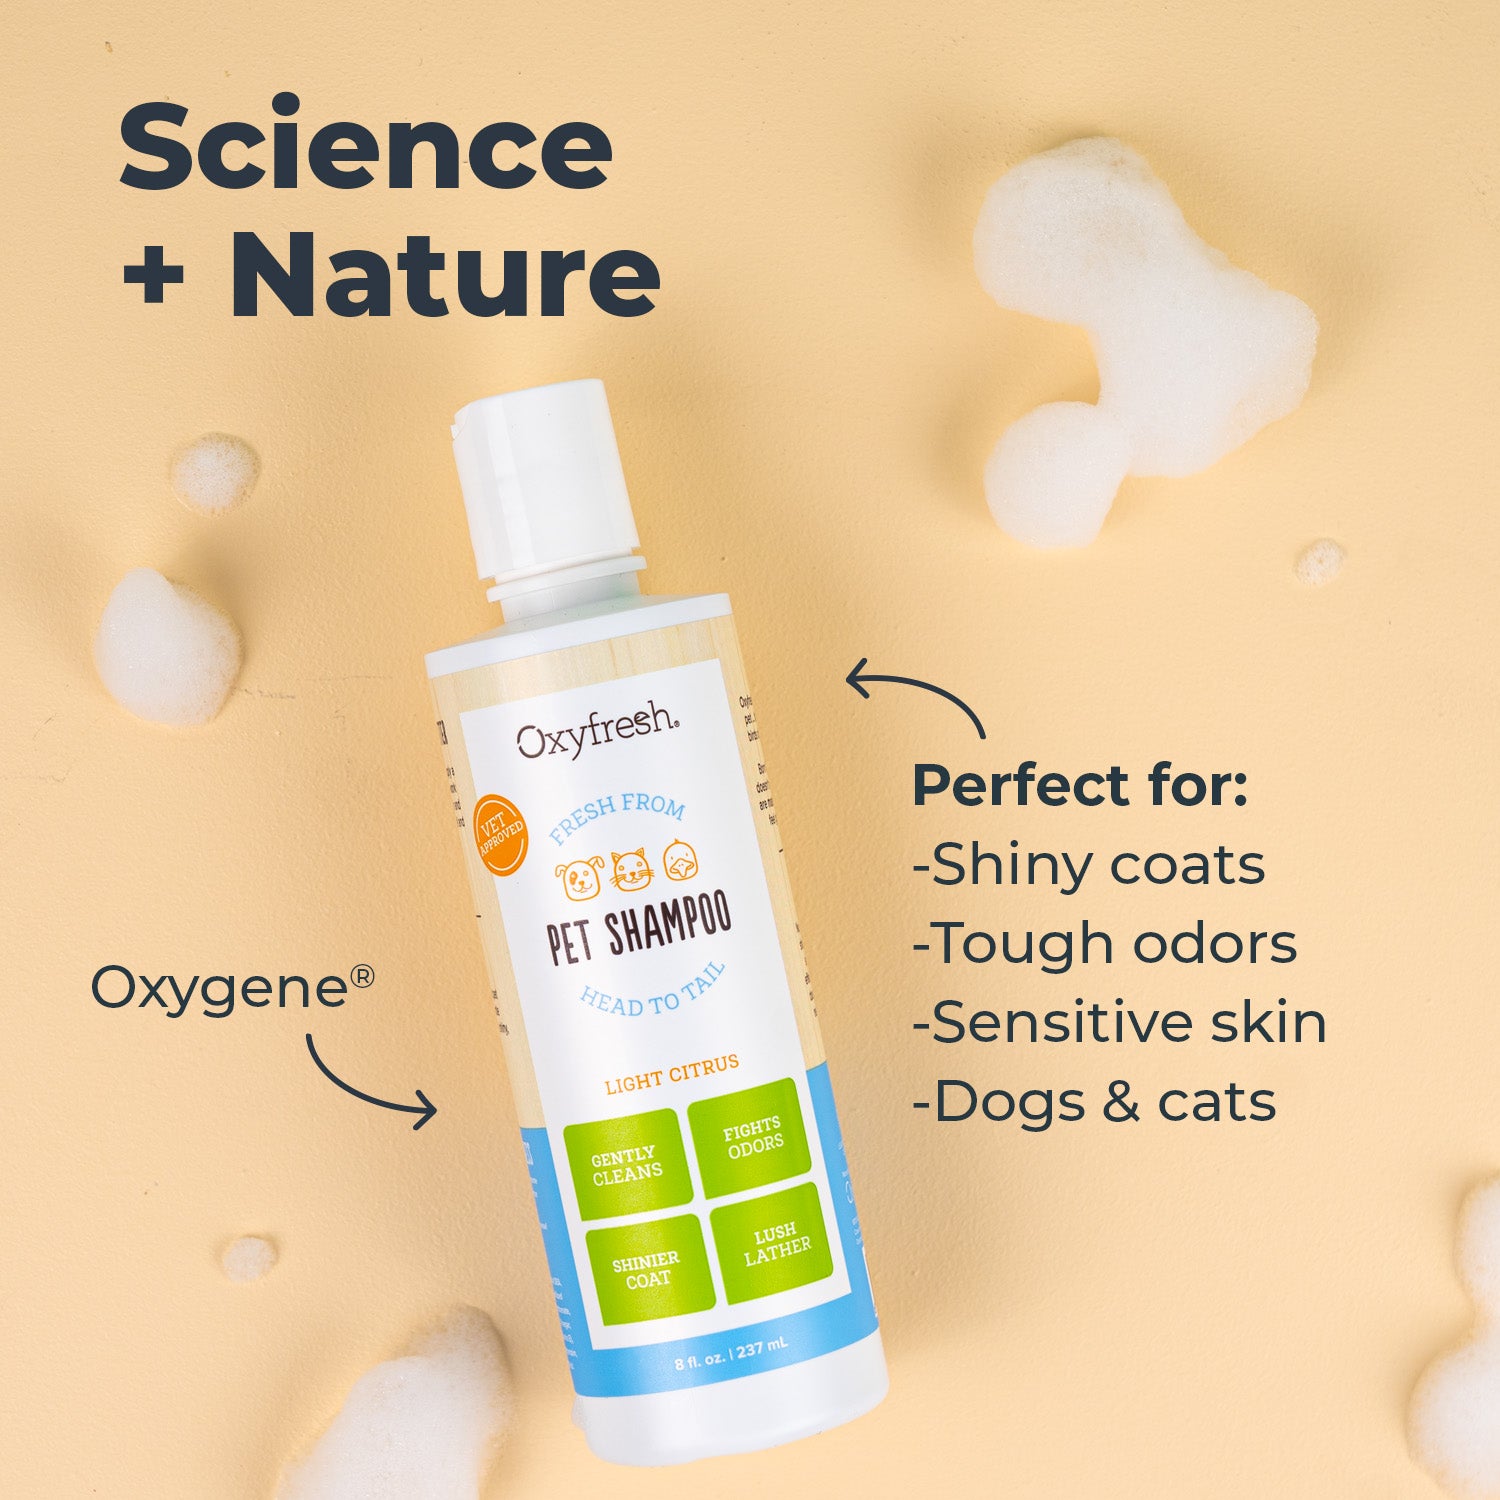 oxyfresh-pet-shampoo-is-perfect-for-shiny-coats-tough-odors-sensitive-skin-and-for-dogs-and-cats